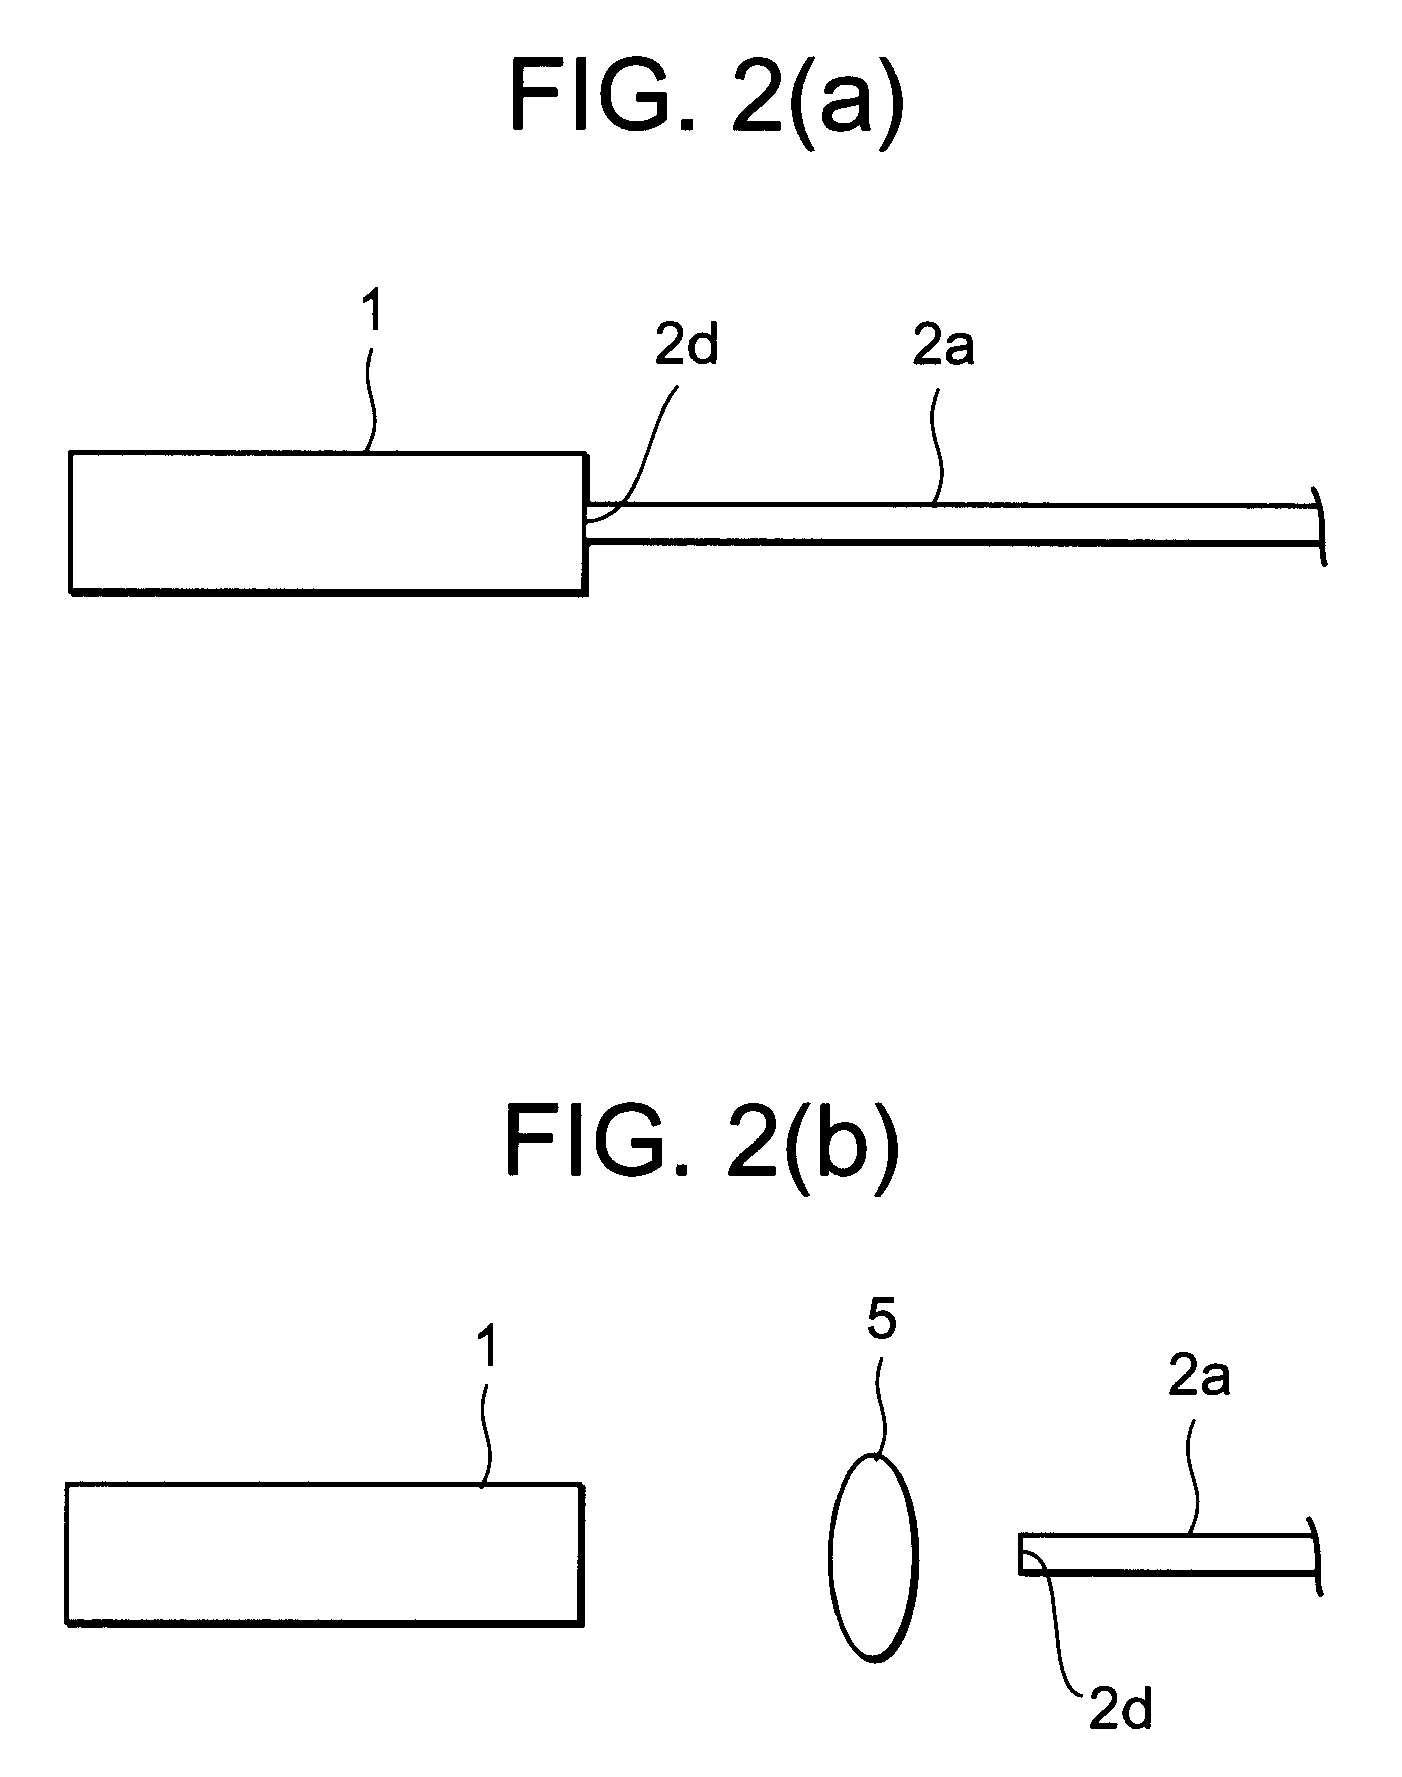 Optical module and method of packaging the same